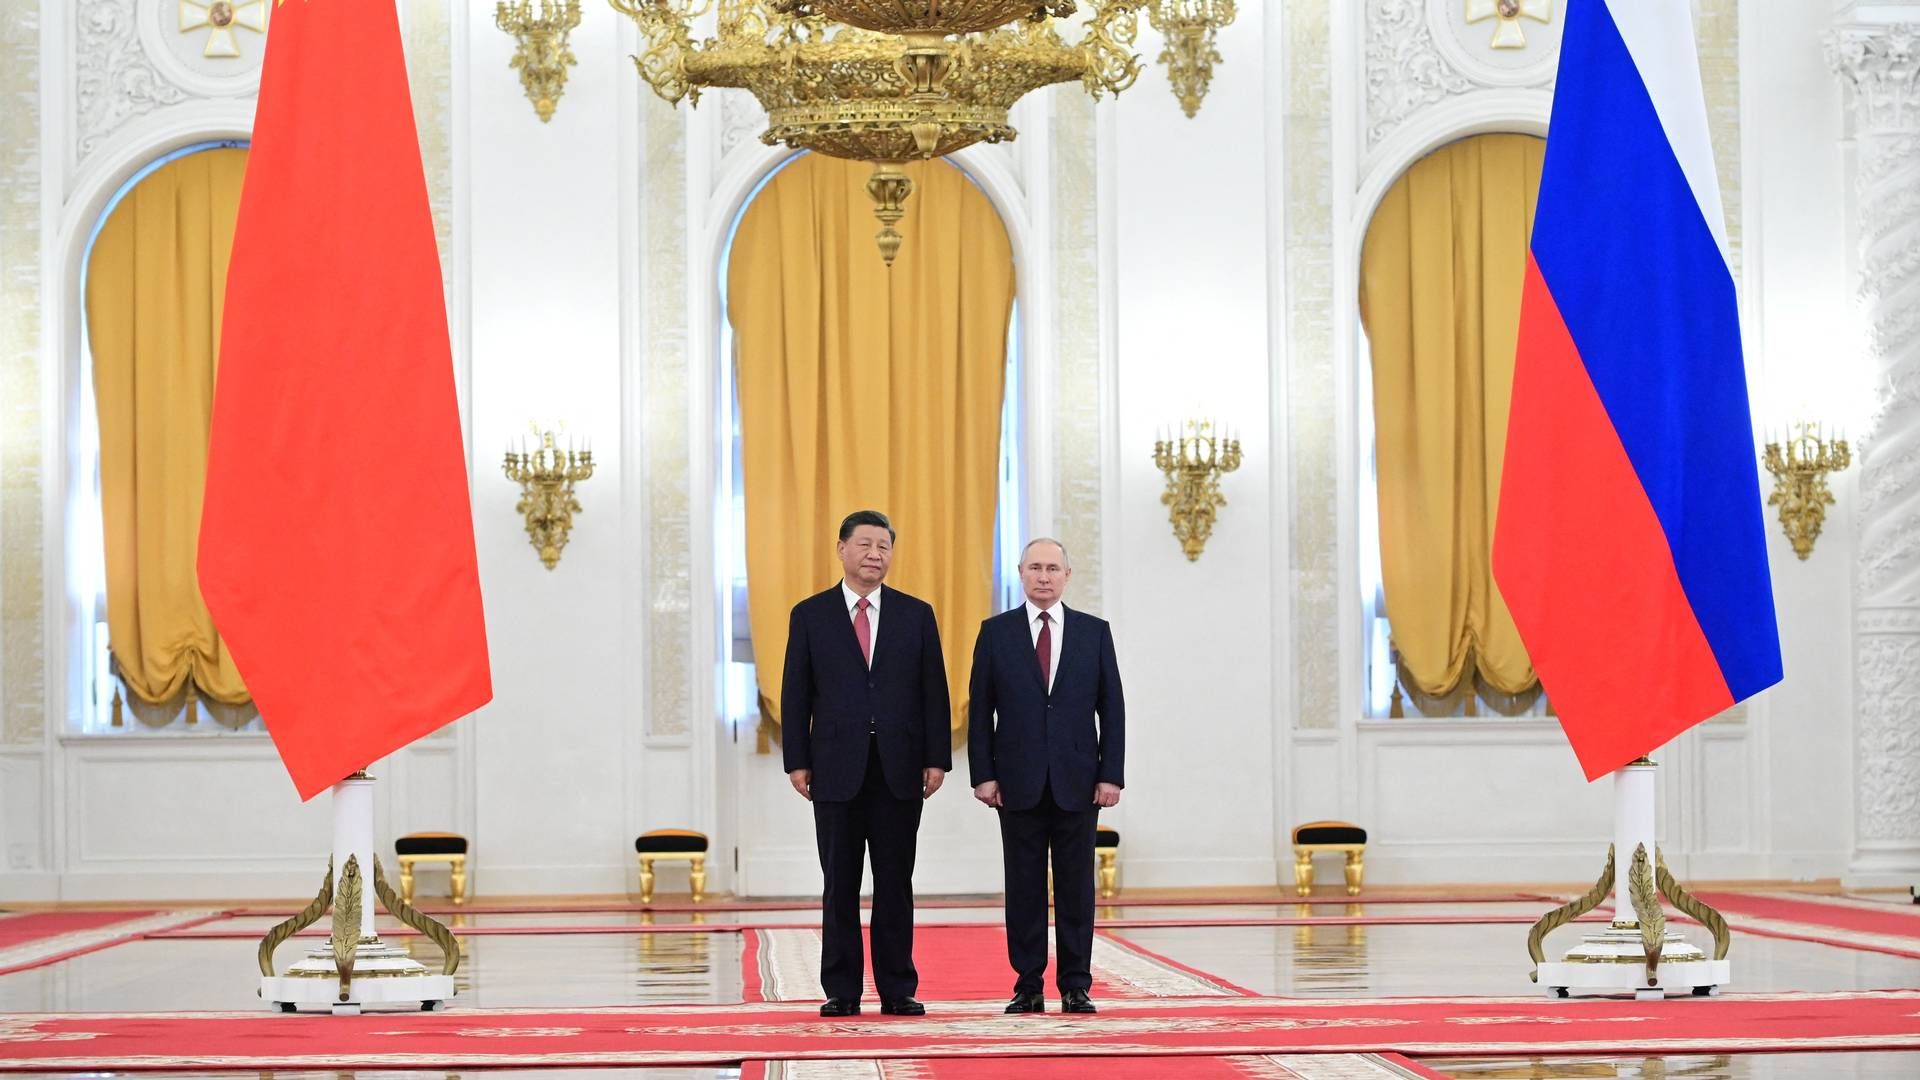 During a meeting in 2019, Chinese president Xi Jinping called Putin "his best, most trusted friend". A friendship that has since left its mark on the coal market. | Photo: Sputnik/Reuters/Ritzau Scanpix